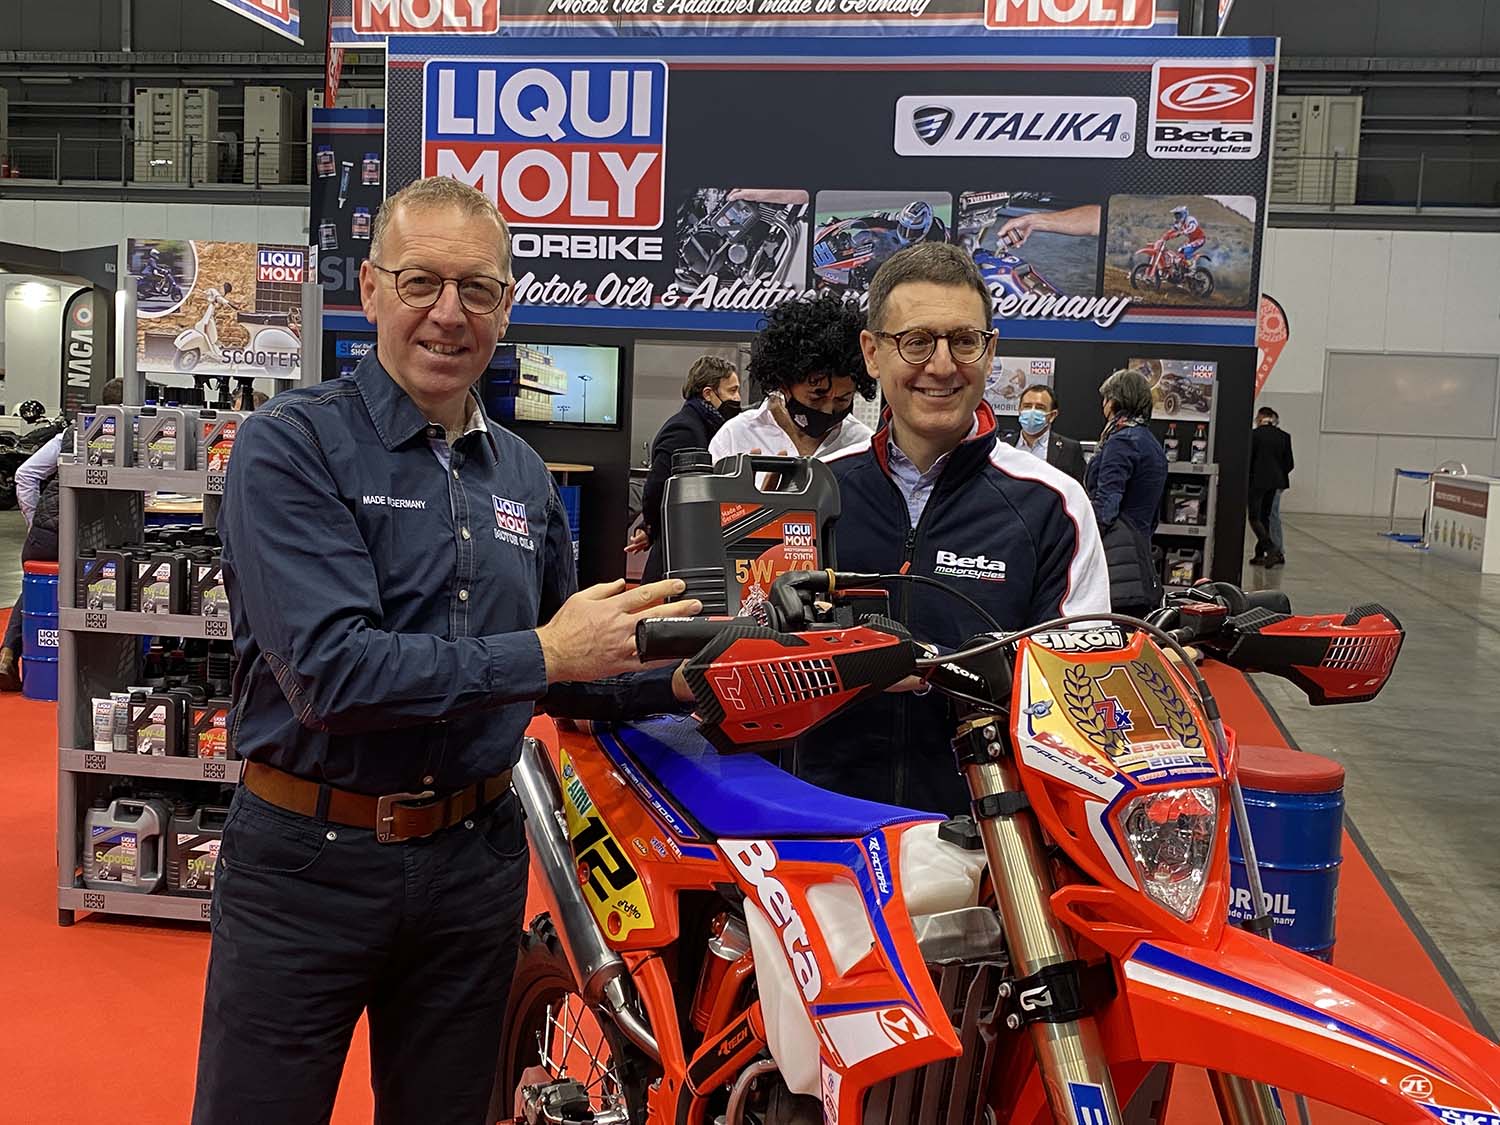 LIQUI MOLY In Every Motorcycle From Beta